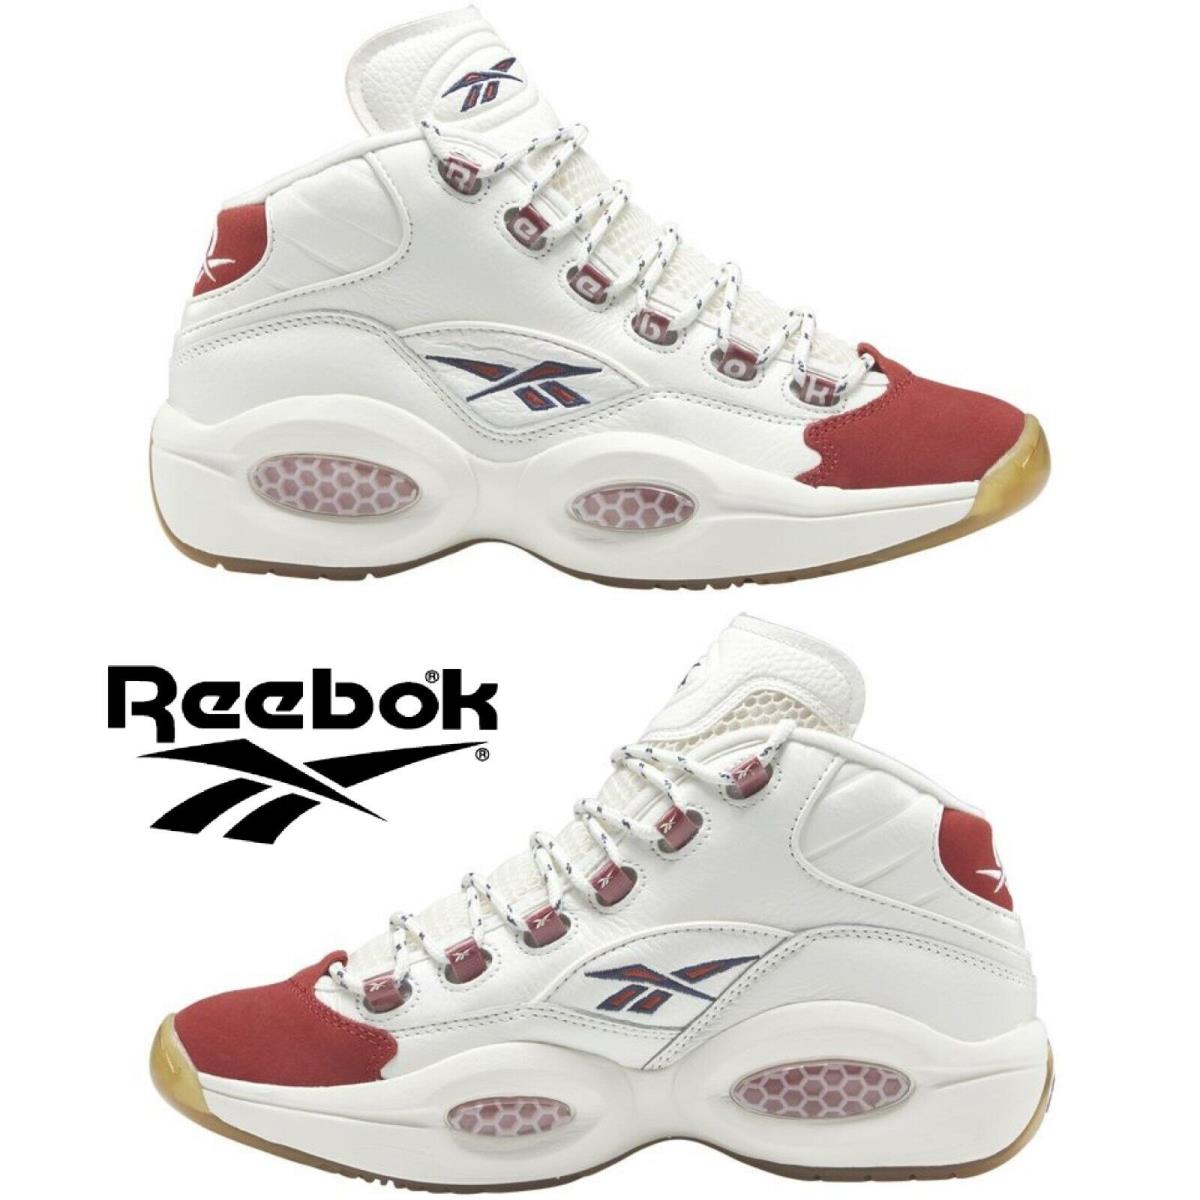 Reebok Question Mid Basketball Shoes Men`s Sneakers Running Casual Sport